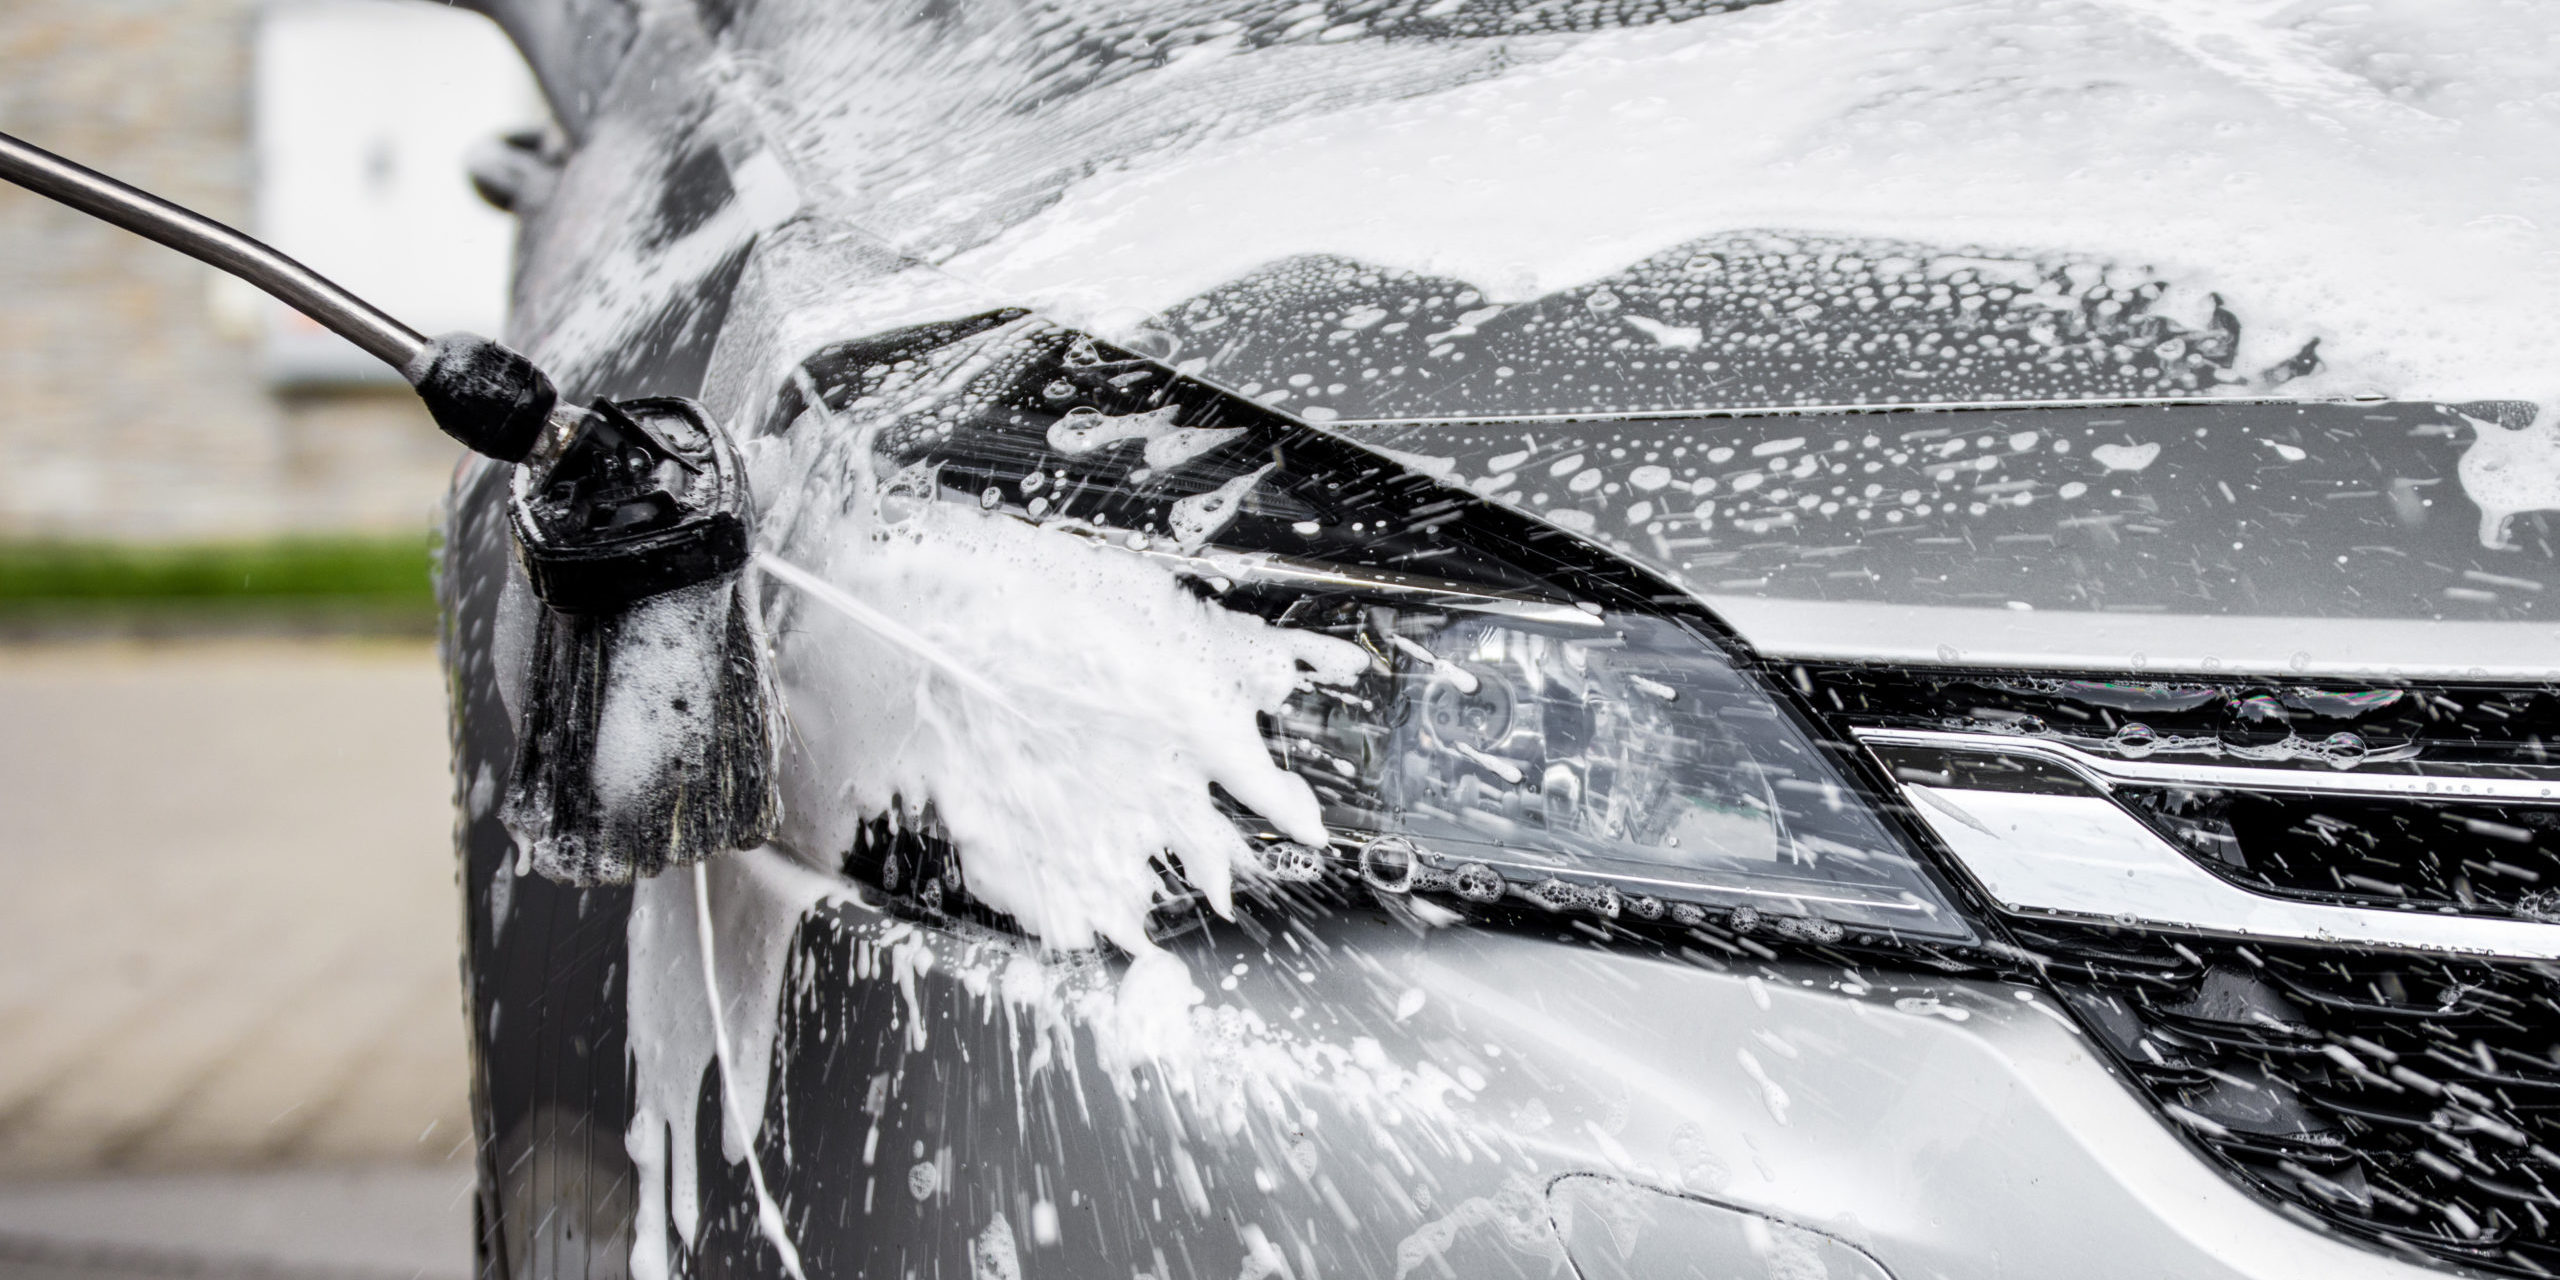 Which is better, car wash using water or car wash without water